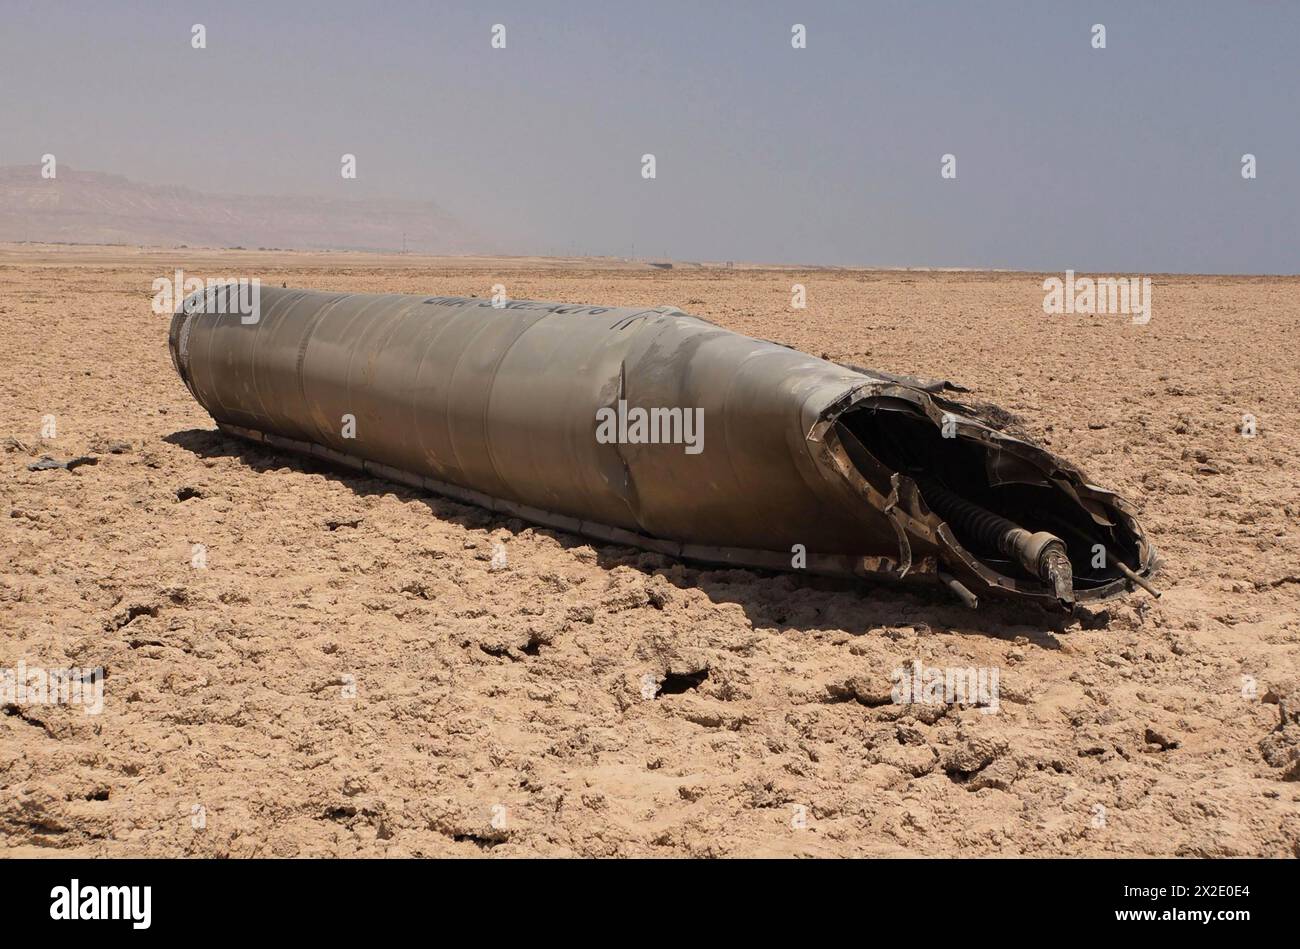 The remains of an Iranian ballistic missile that was intercepted over Israel during the Iranian assault found in the shore of the Dead Sea, Israel. The Emad missile's 500-kilogram (1,100-lb) warhead had flown over 1,500 kilometers from Iran to Israel in 12 minutes and was one of 120 ballistic missiles fired at Israel. Stock Photo